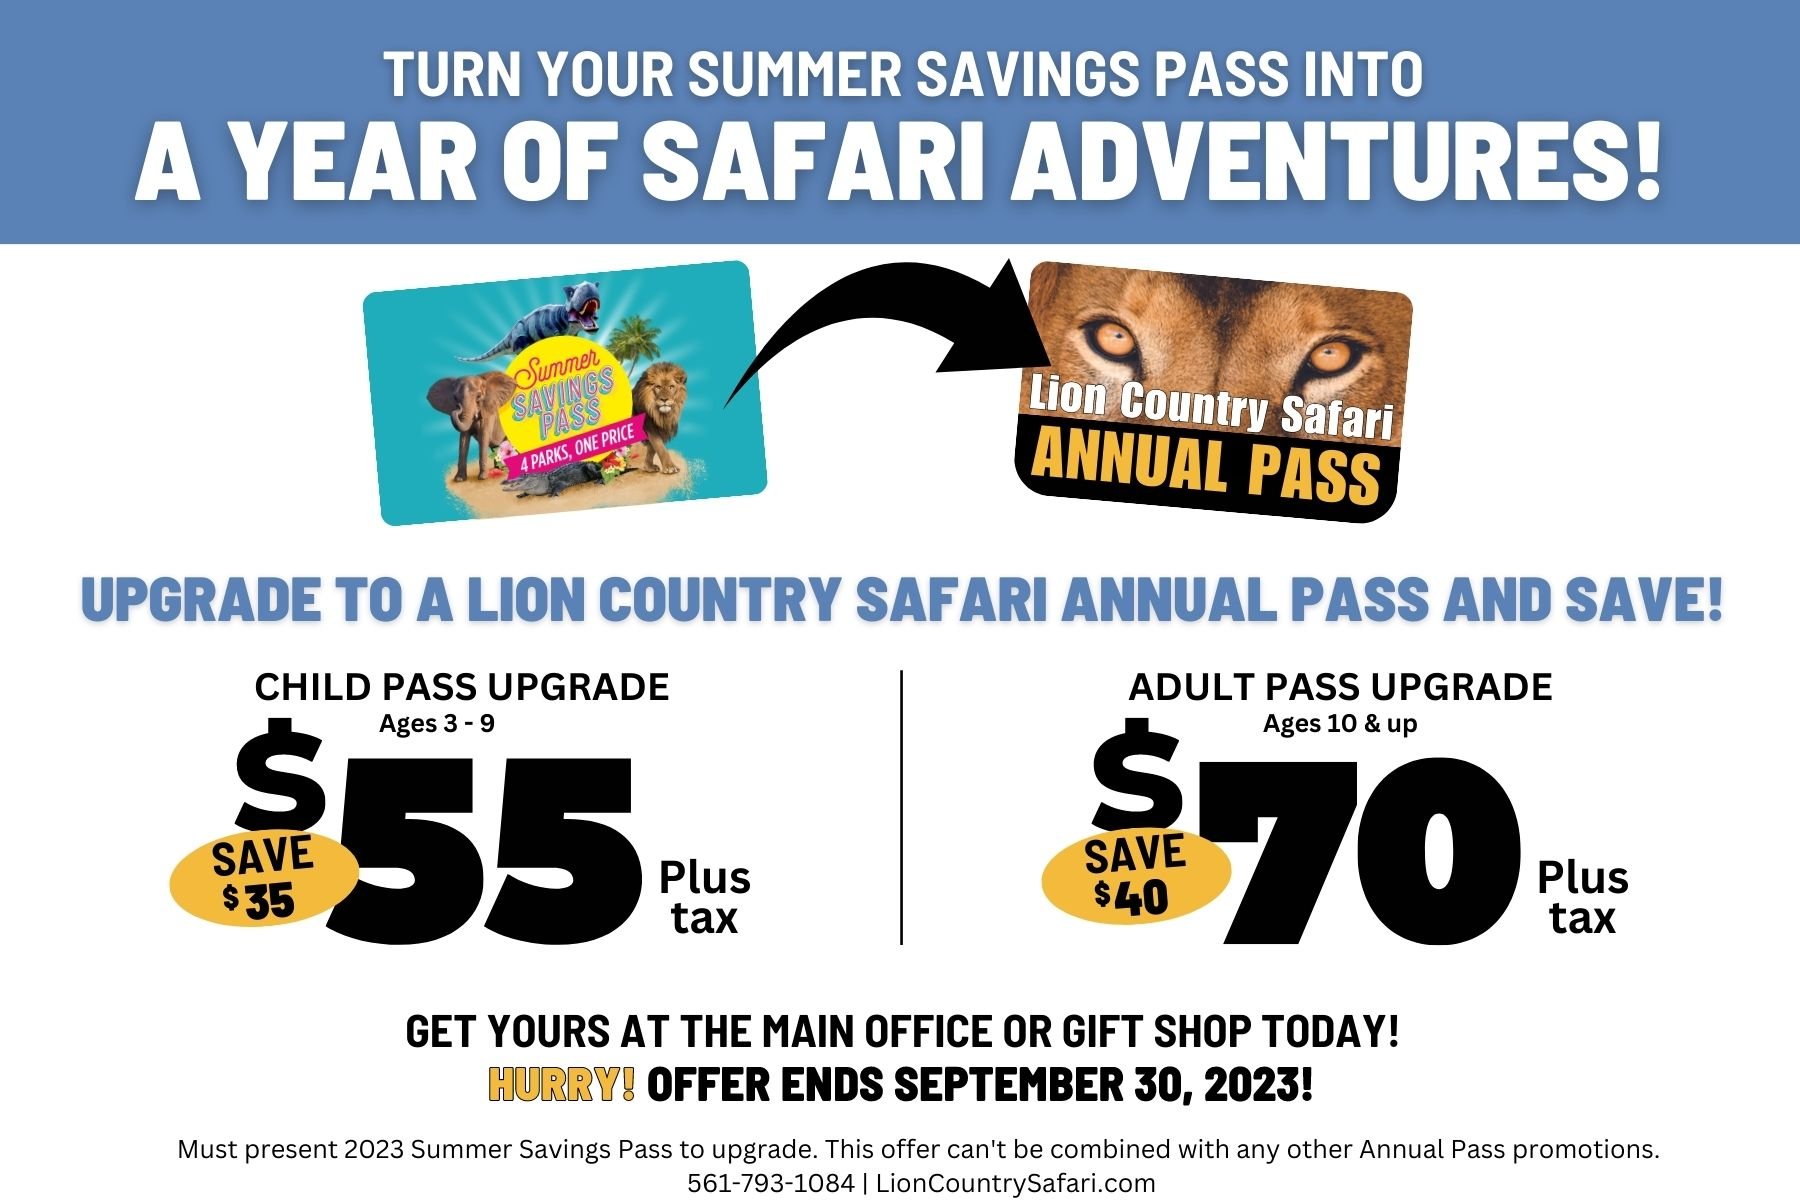 Turn your Summer Savings Pass into a year of safari adventures! Upgrade to an Annual Pass and save. Child pass upgrade (ages 3 - 9) for $55 plus tax. Adult pass upgrade (ages 10 and up) for $70 plus tax. Get yours at the main office or gift shop today. Offer ends 9/30/2023. Must present valid 2023 Summer Savings Pass to upgrade. This offer cannot be combined with other Annual Pass promotions. 